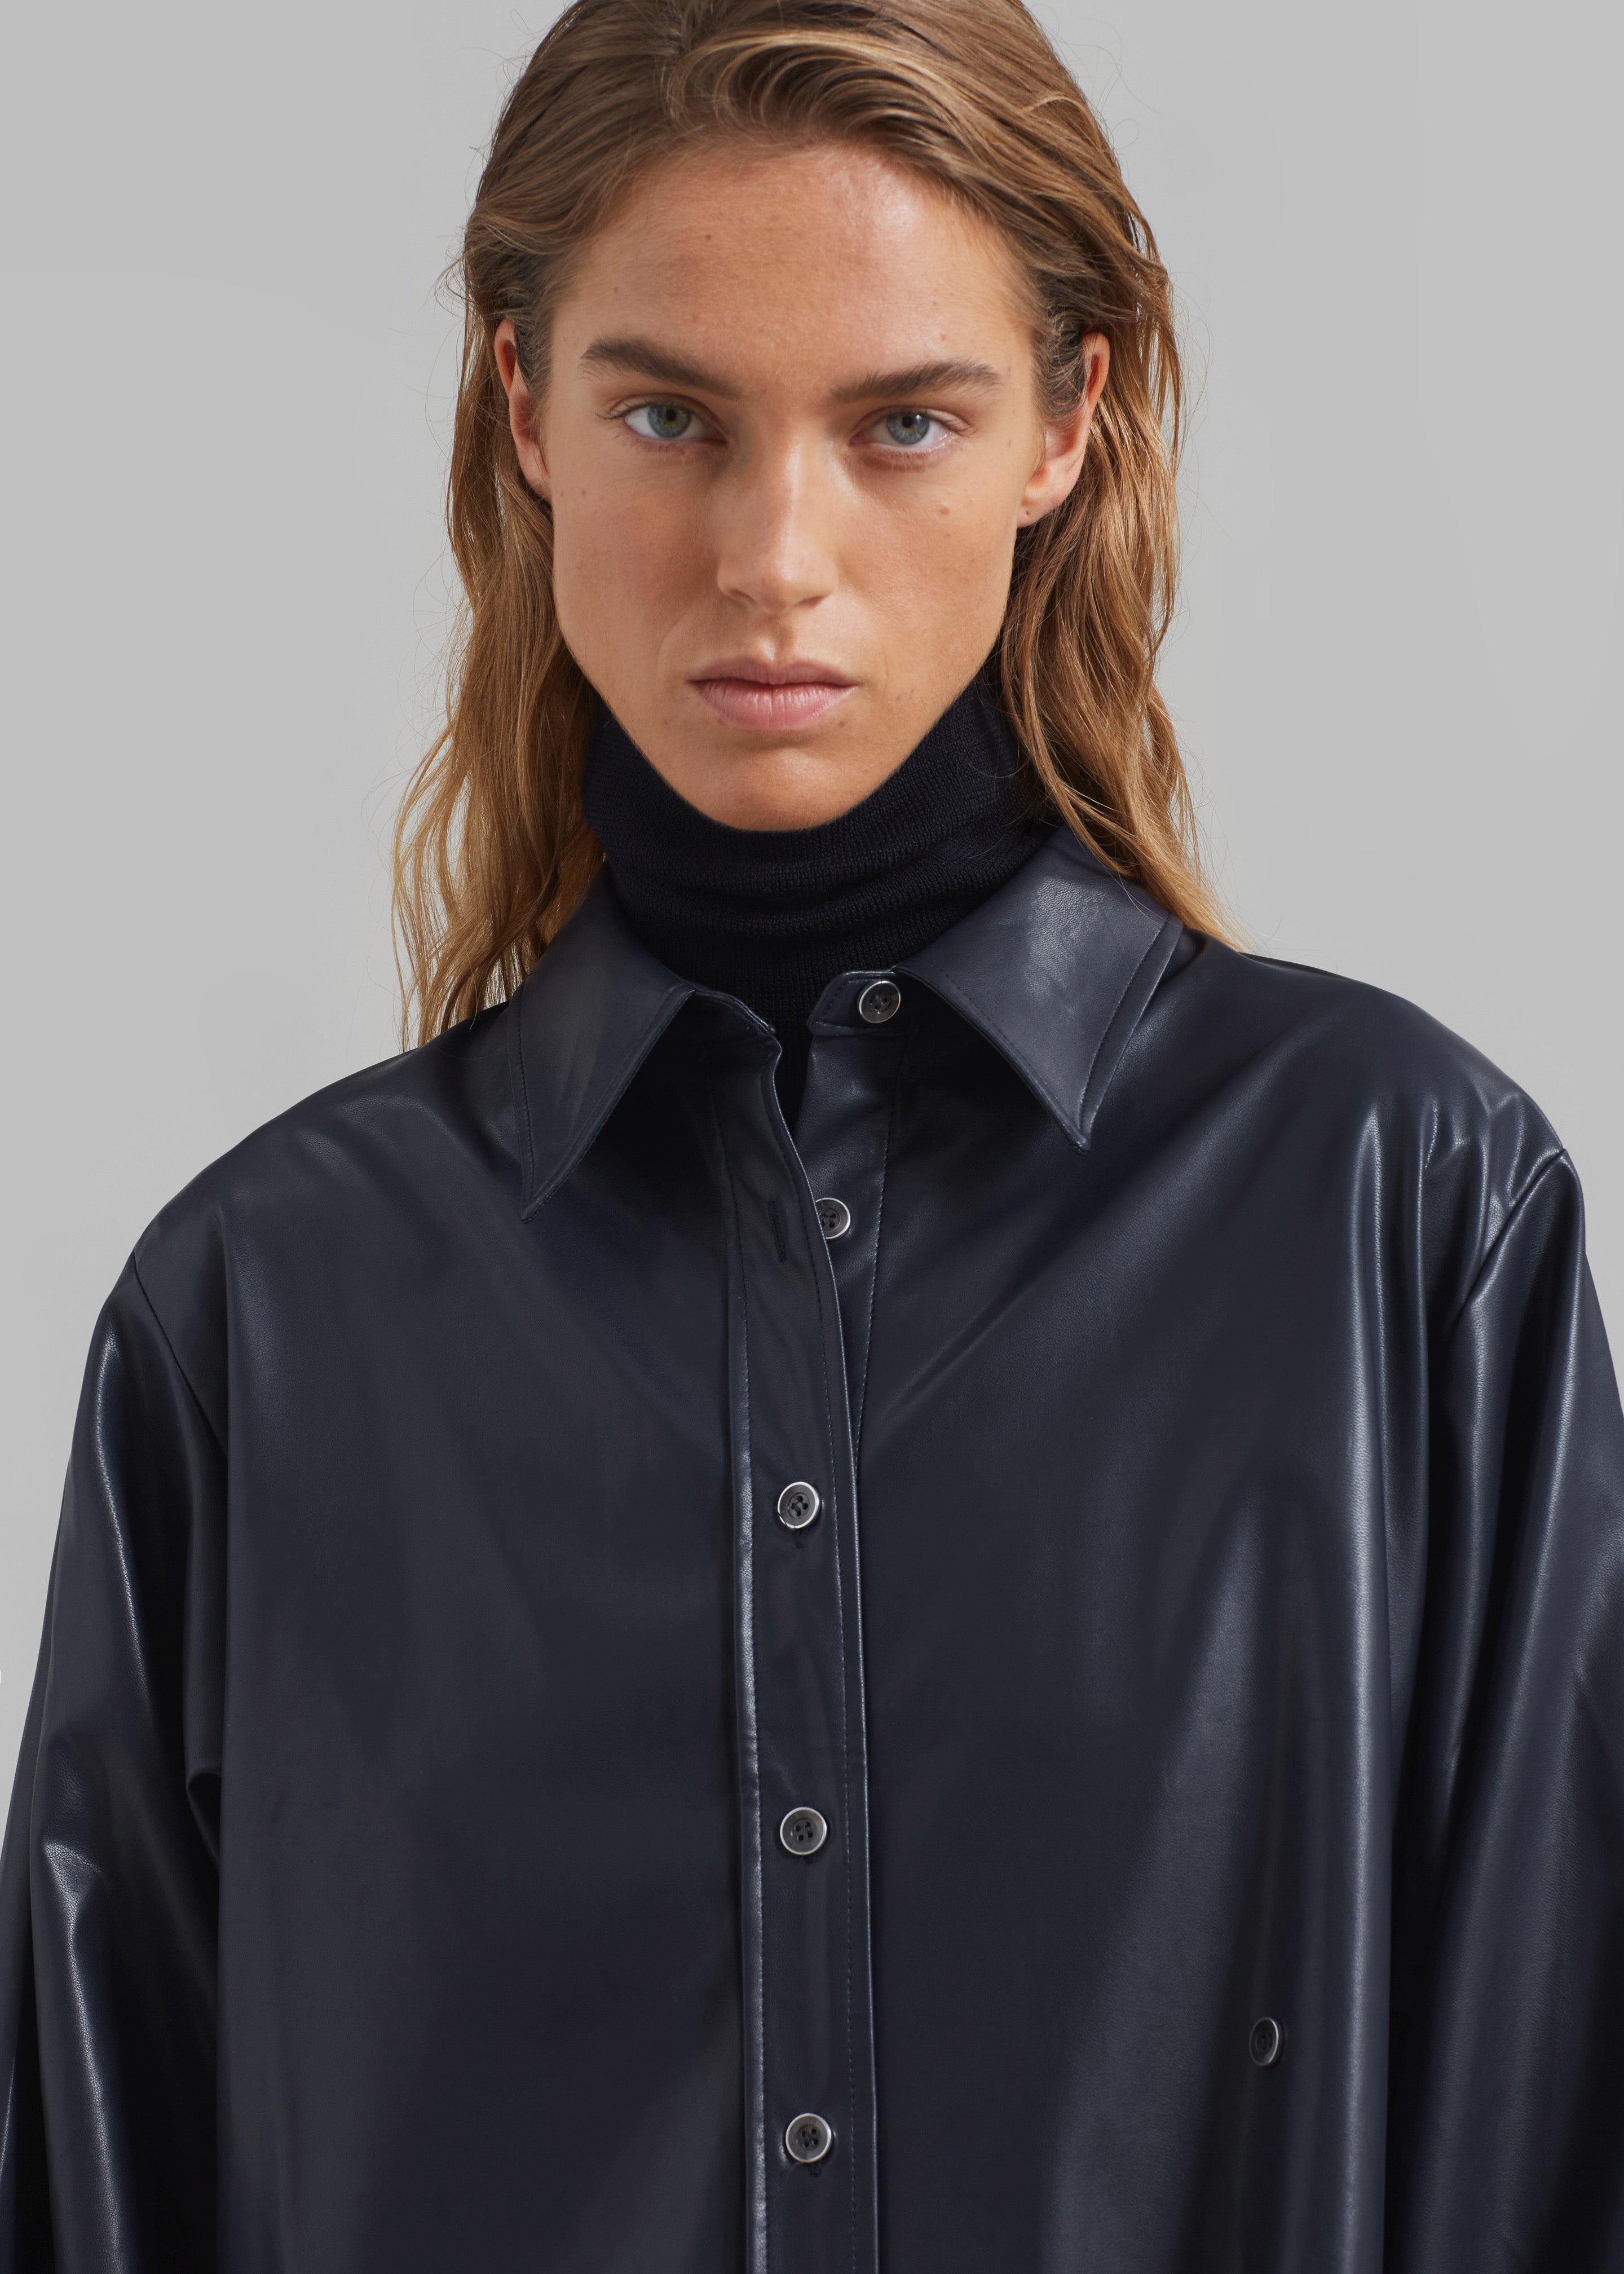 Luke Faux Leather Button Up Shirt - Navy - 3